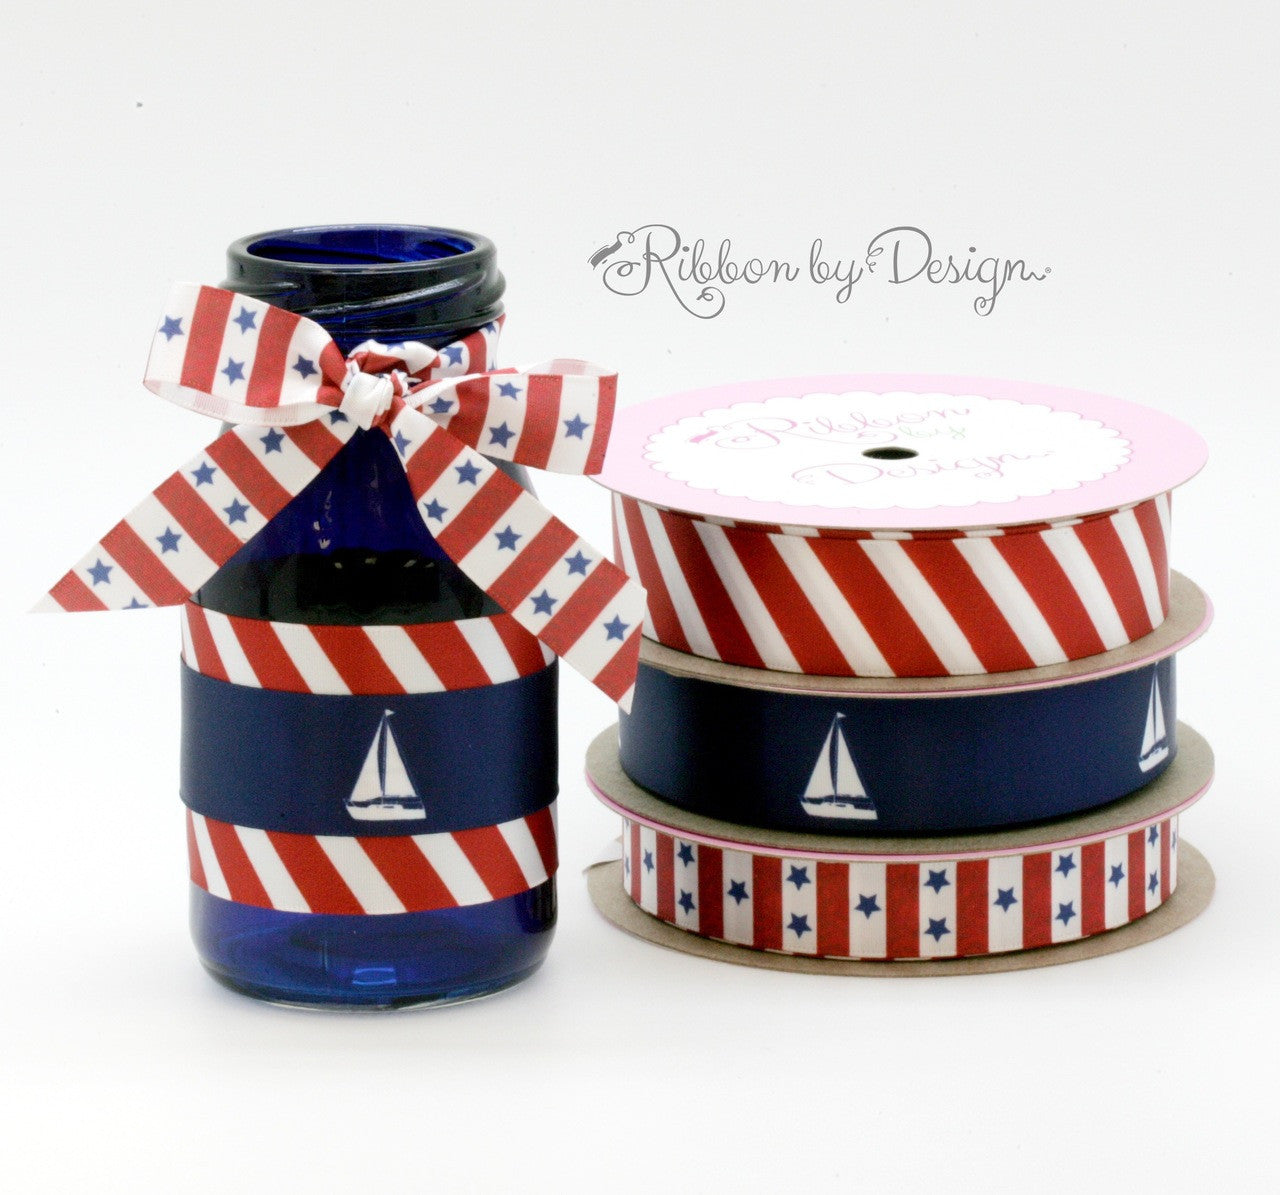 Our stars and stripes mix with sailboats and red and white stripes in our nautical collection too!